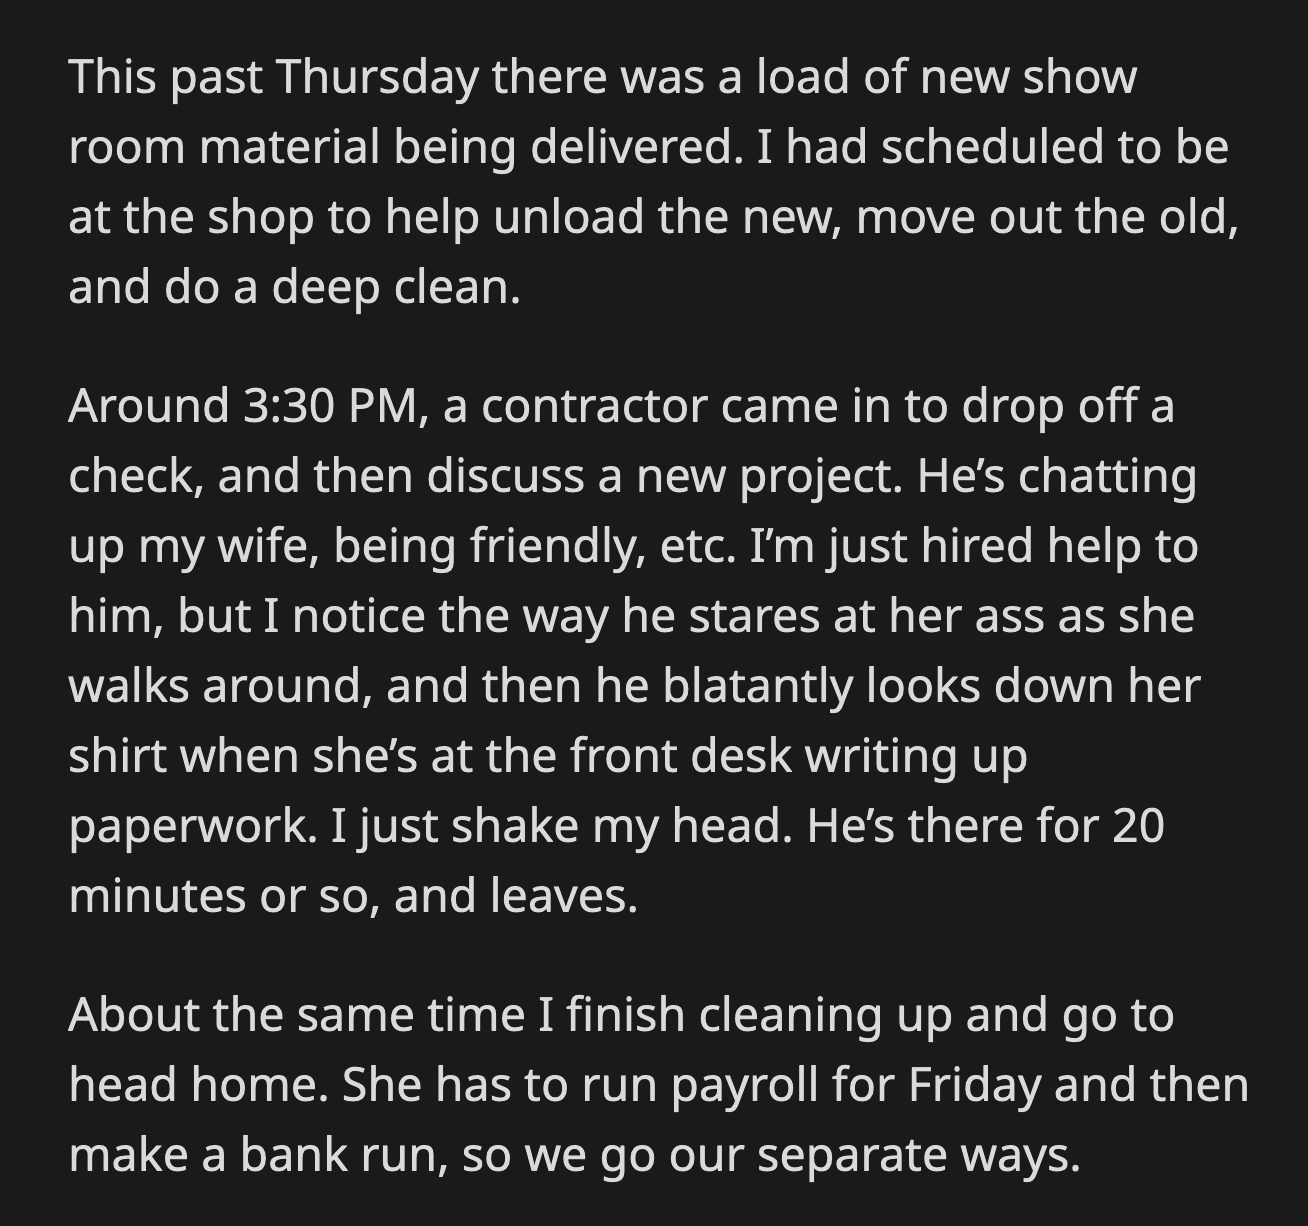 OP decided to stop by a local bar for a beer before running home. The contractor who ogled his wife was there.